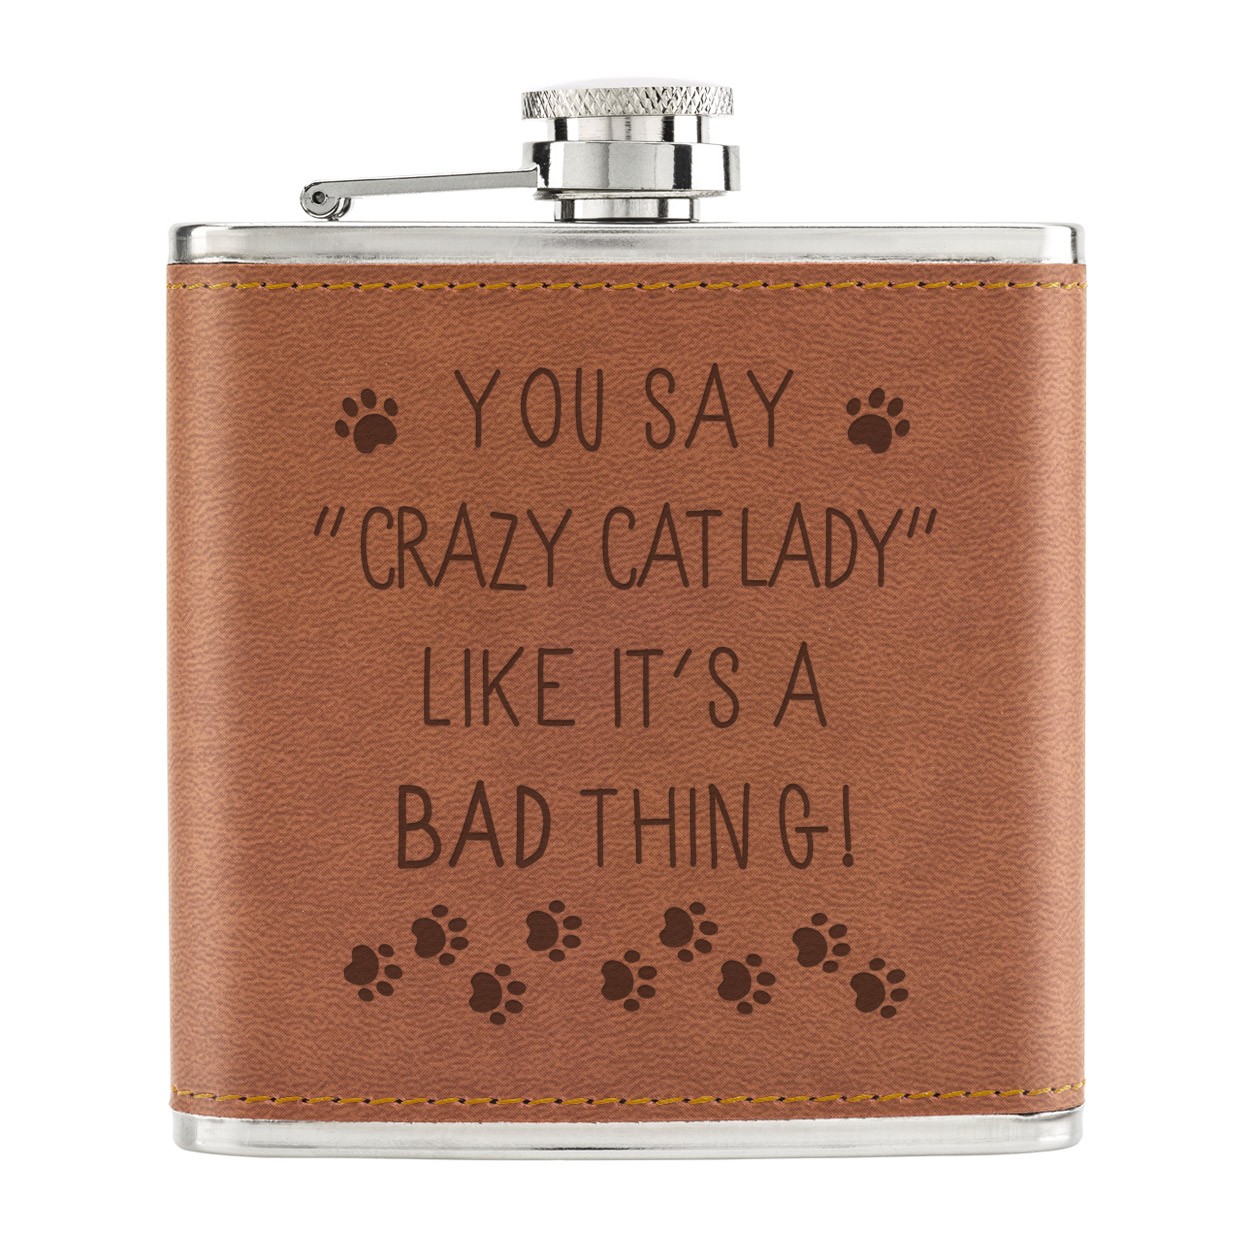 You Say Crazy Cat Lady Like It's A Bad Thing 6oz PU Leather Hip Flask Tan